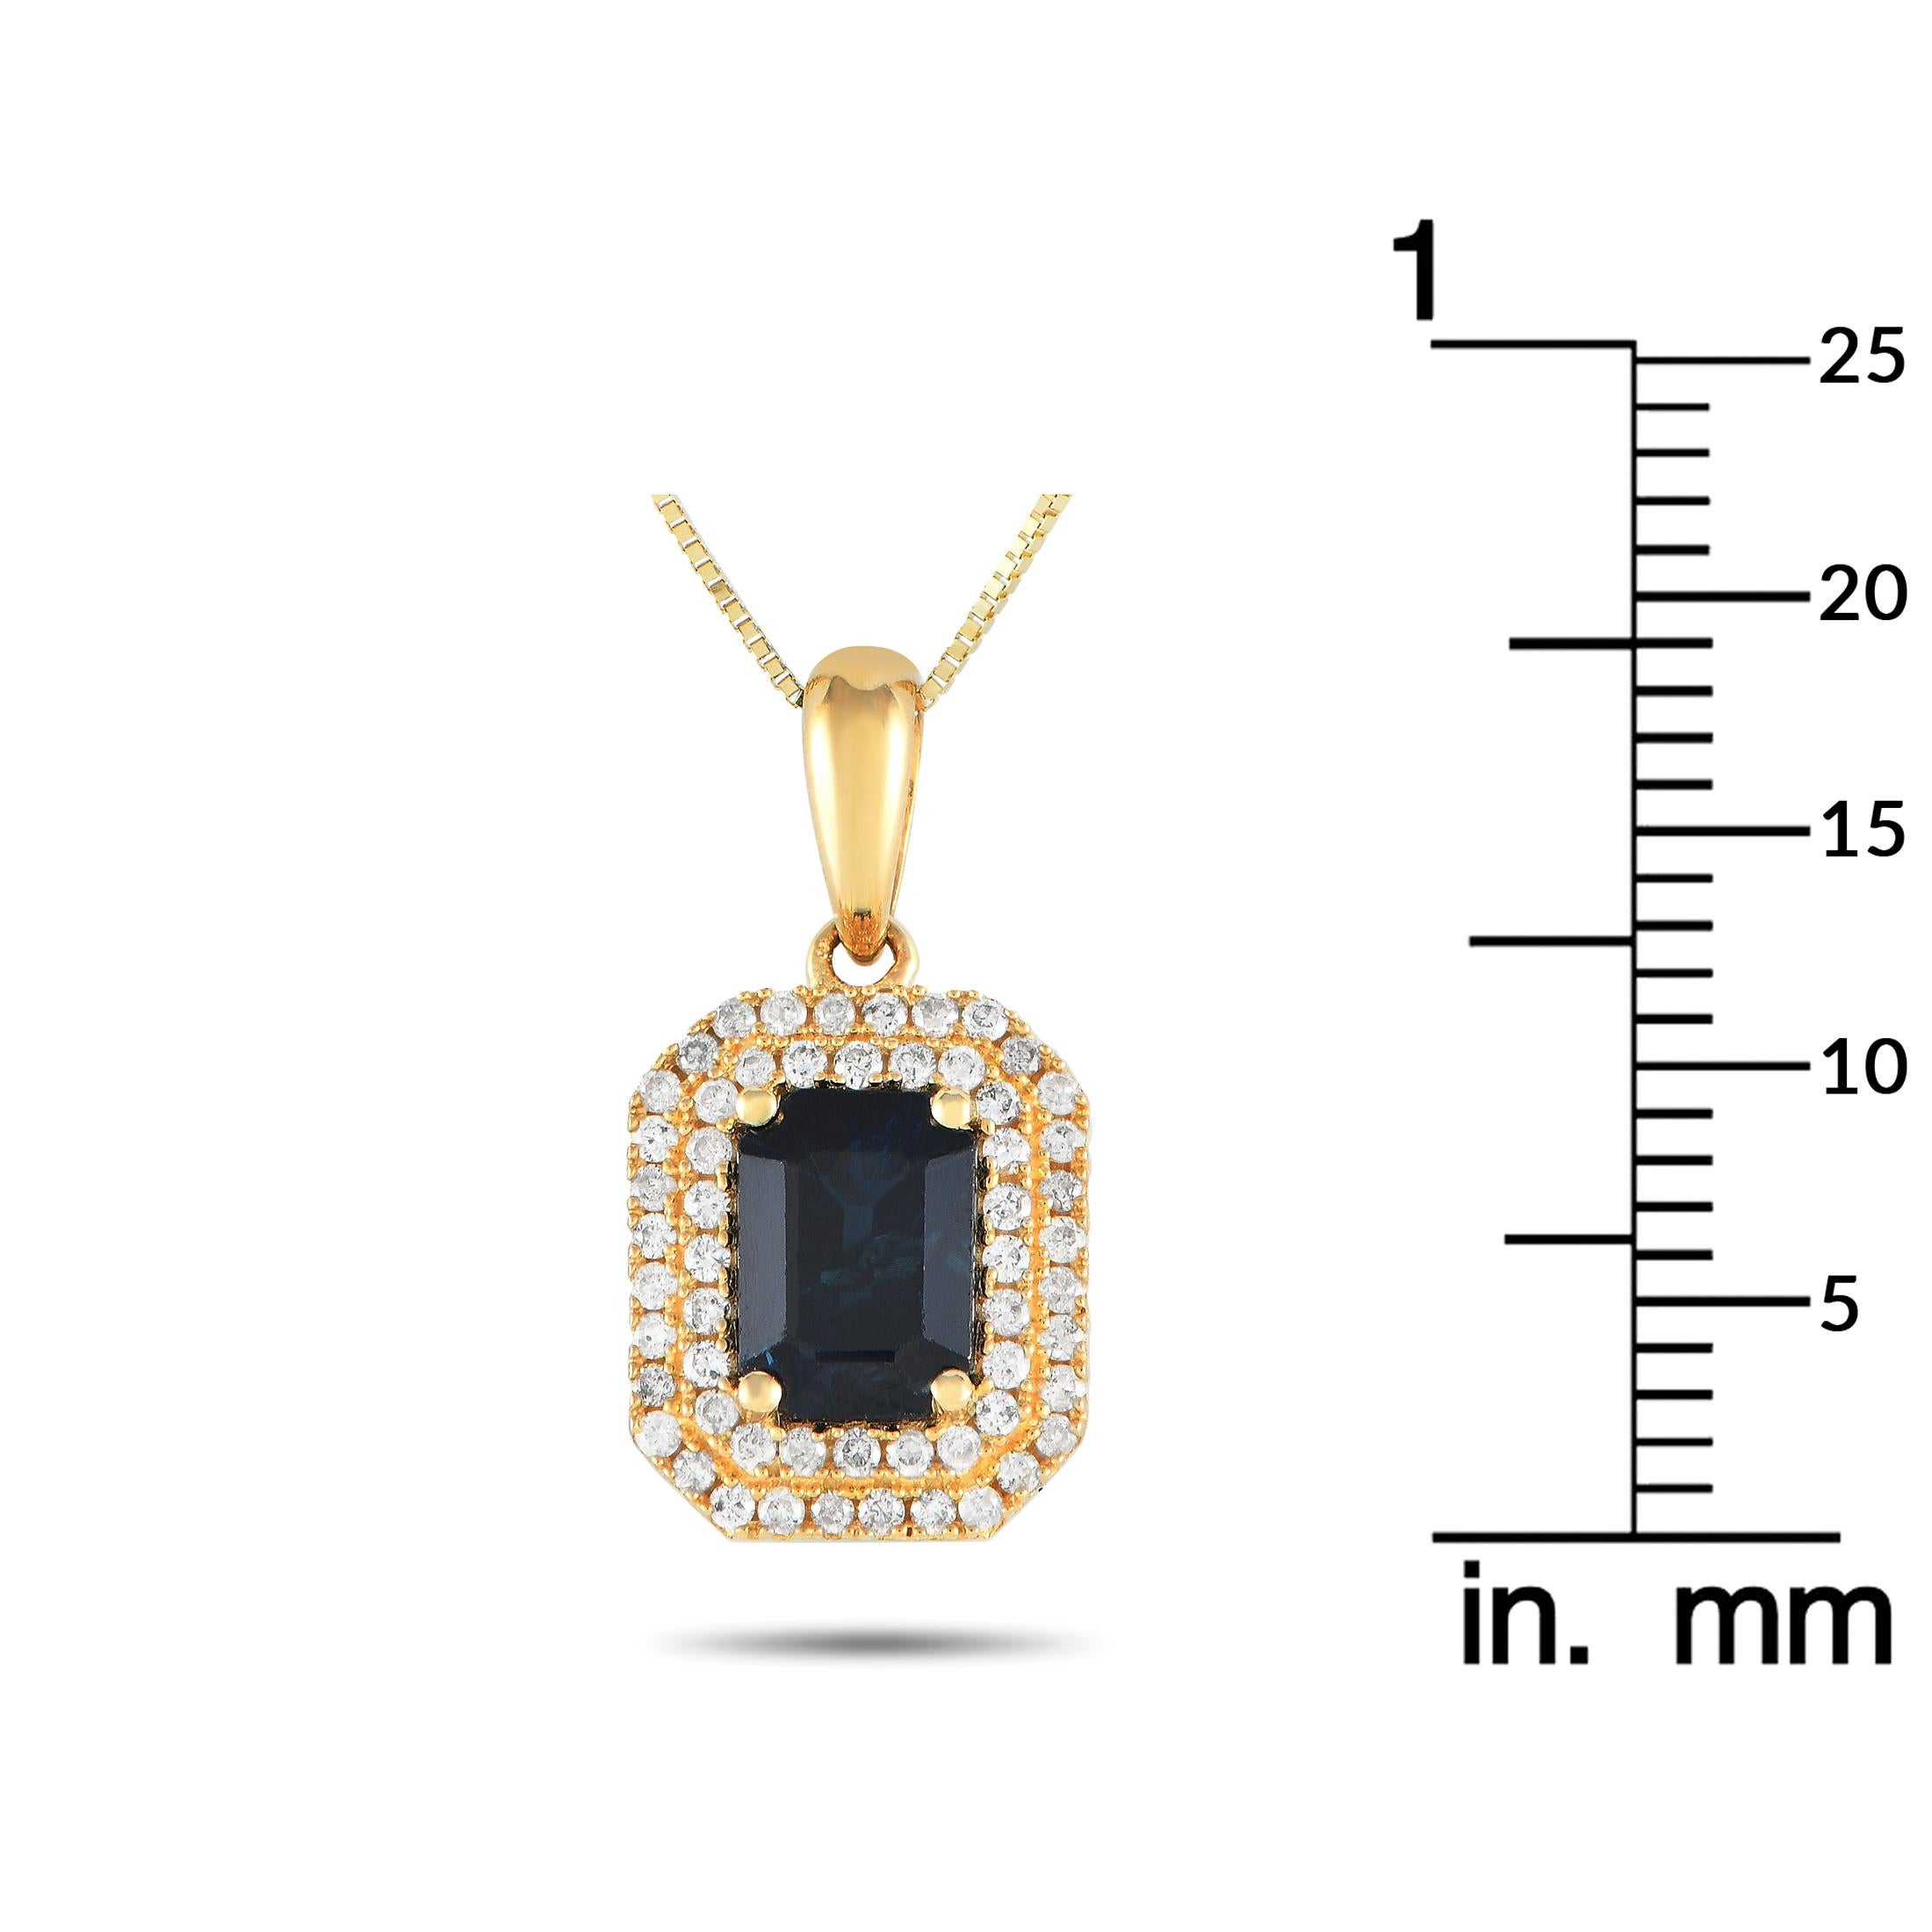 LB Exclusive 14K Yellow Gold 0.24ct Diamond Pendant Necklace PD4-15905YSA In New Condition For Sale In Southampton, PA